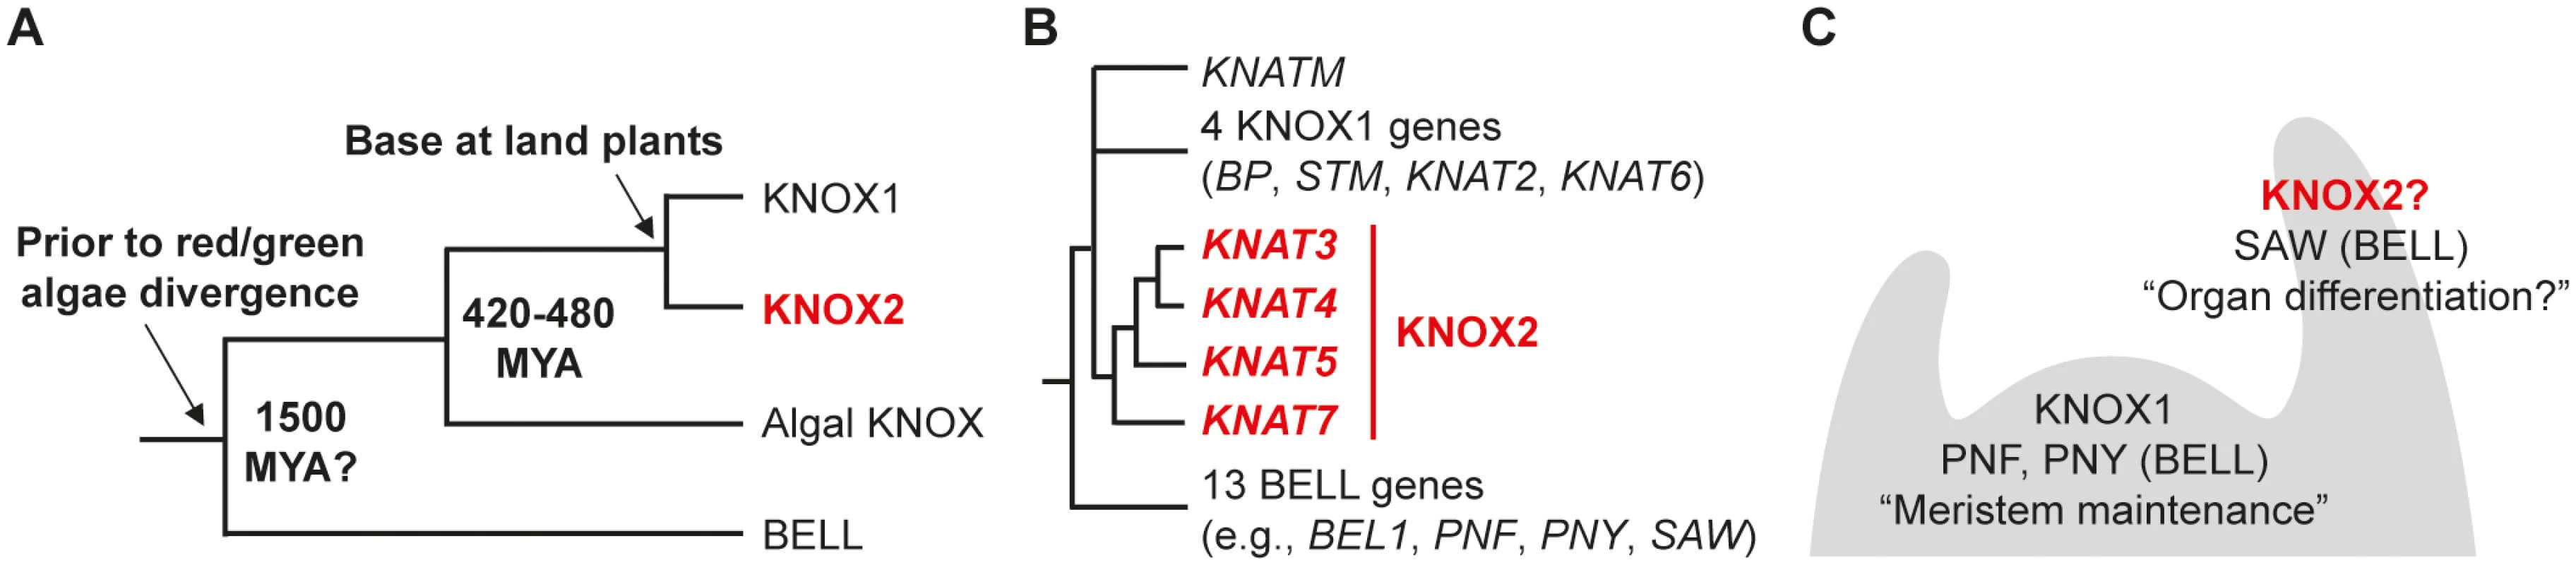 Phylogeny and expression patterns of KNOX and BELL genes.